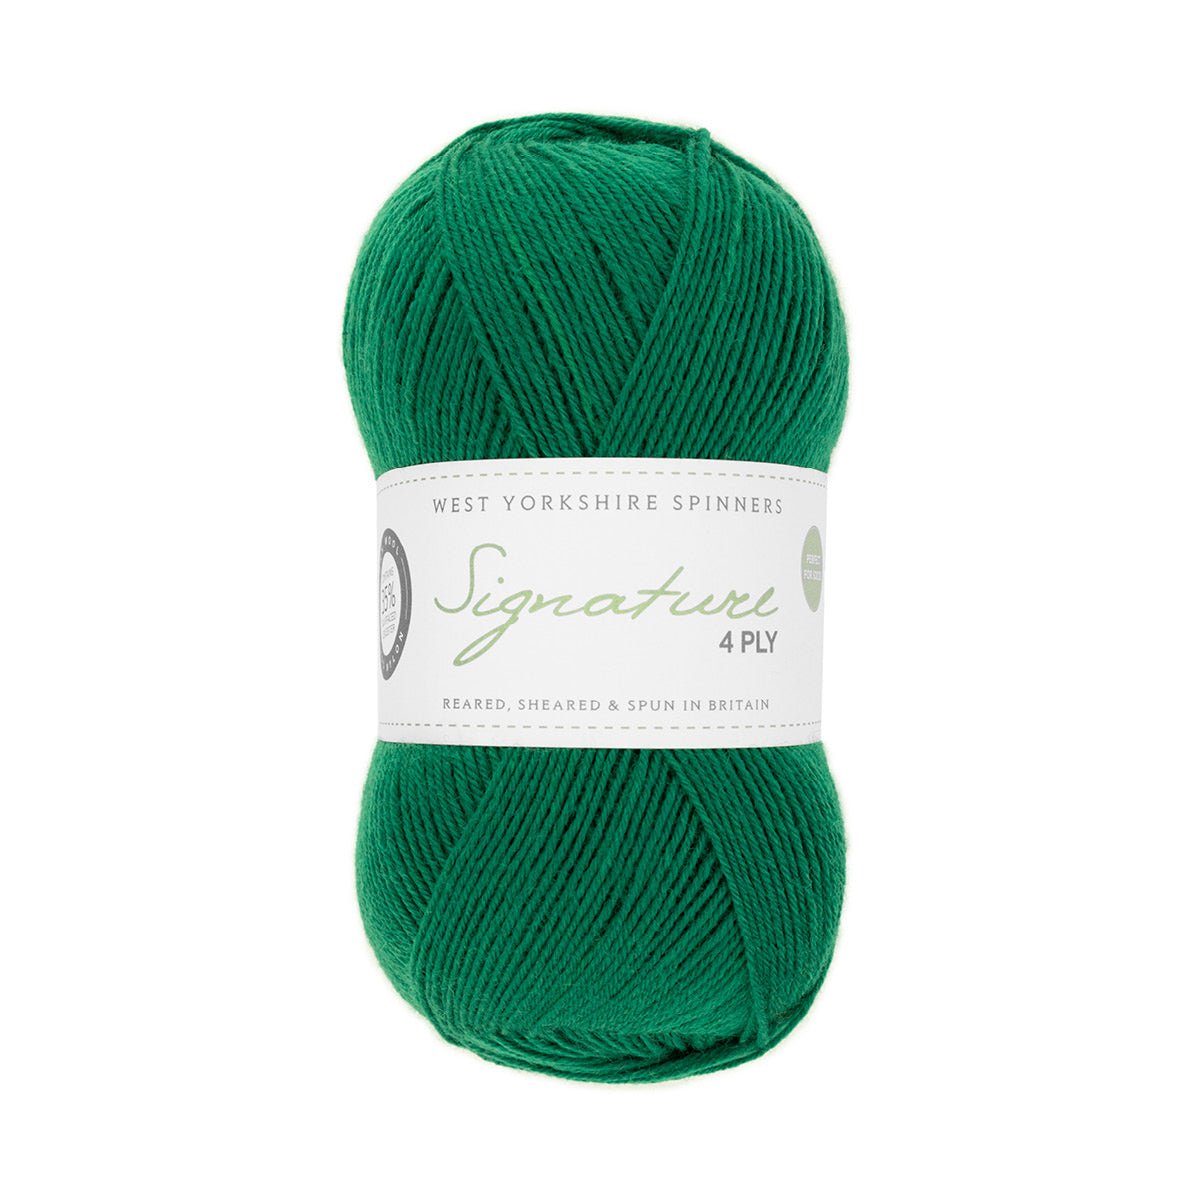 SIGNATURE 4PLY - HAPPY FEET COLLECTION 1006-Spruce - West Yorkshire Spinners